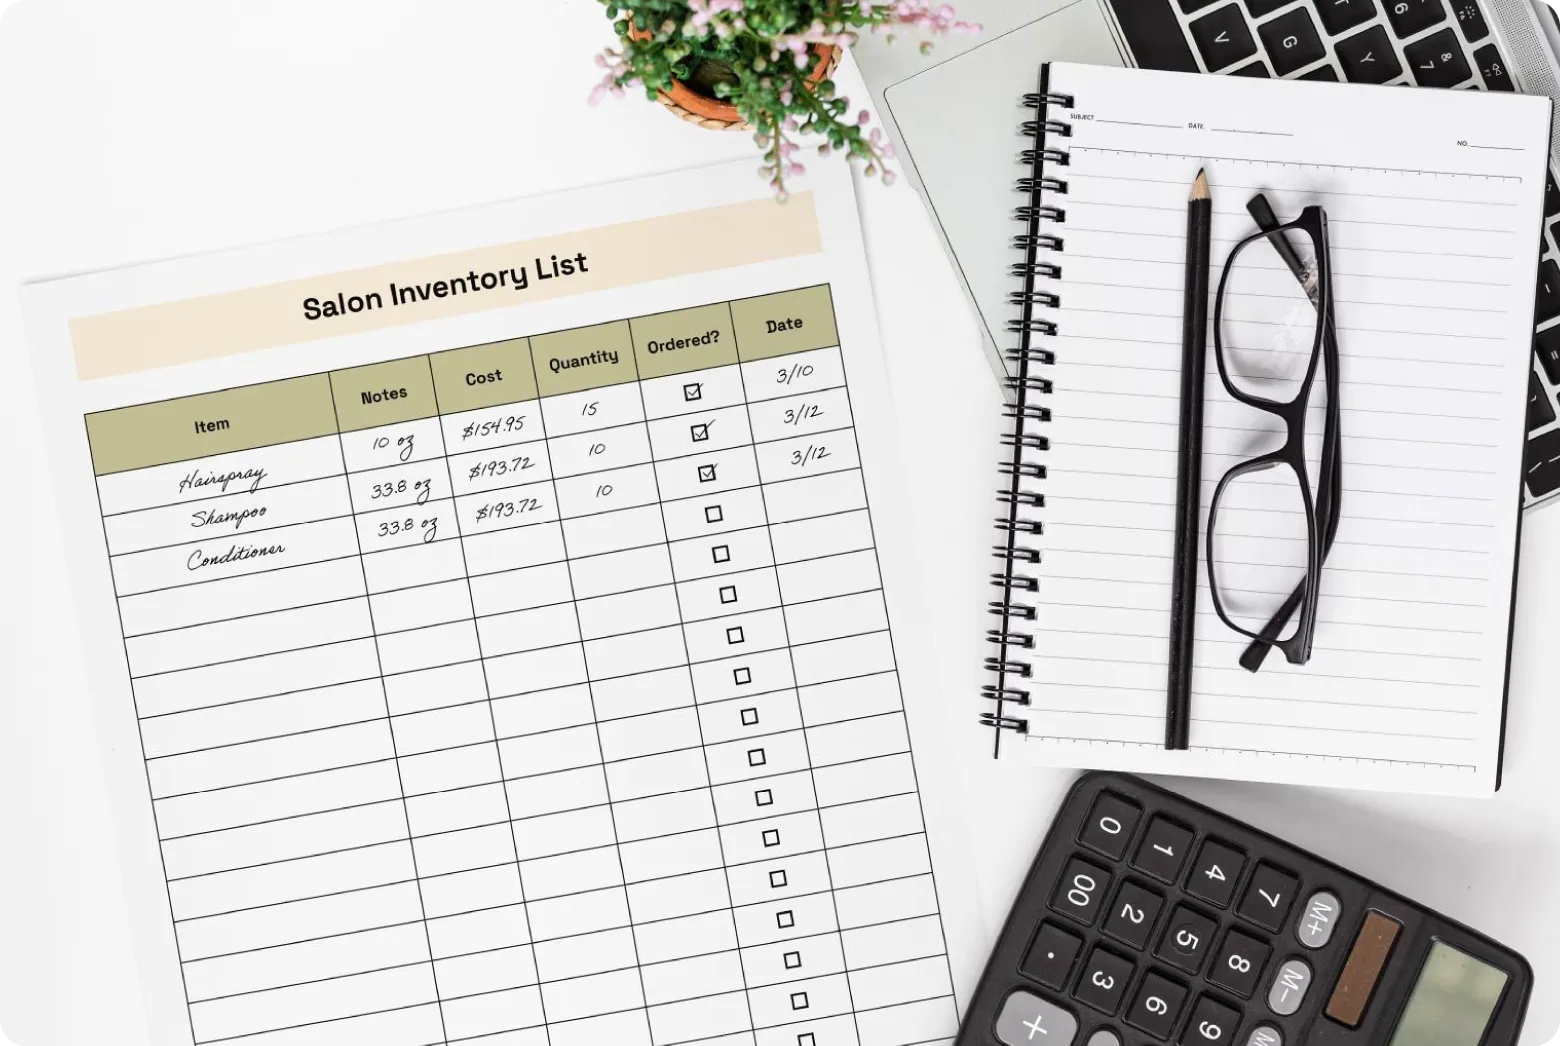 A template for a salon inventory list that can be filled out with stock and order details.